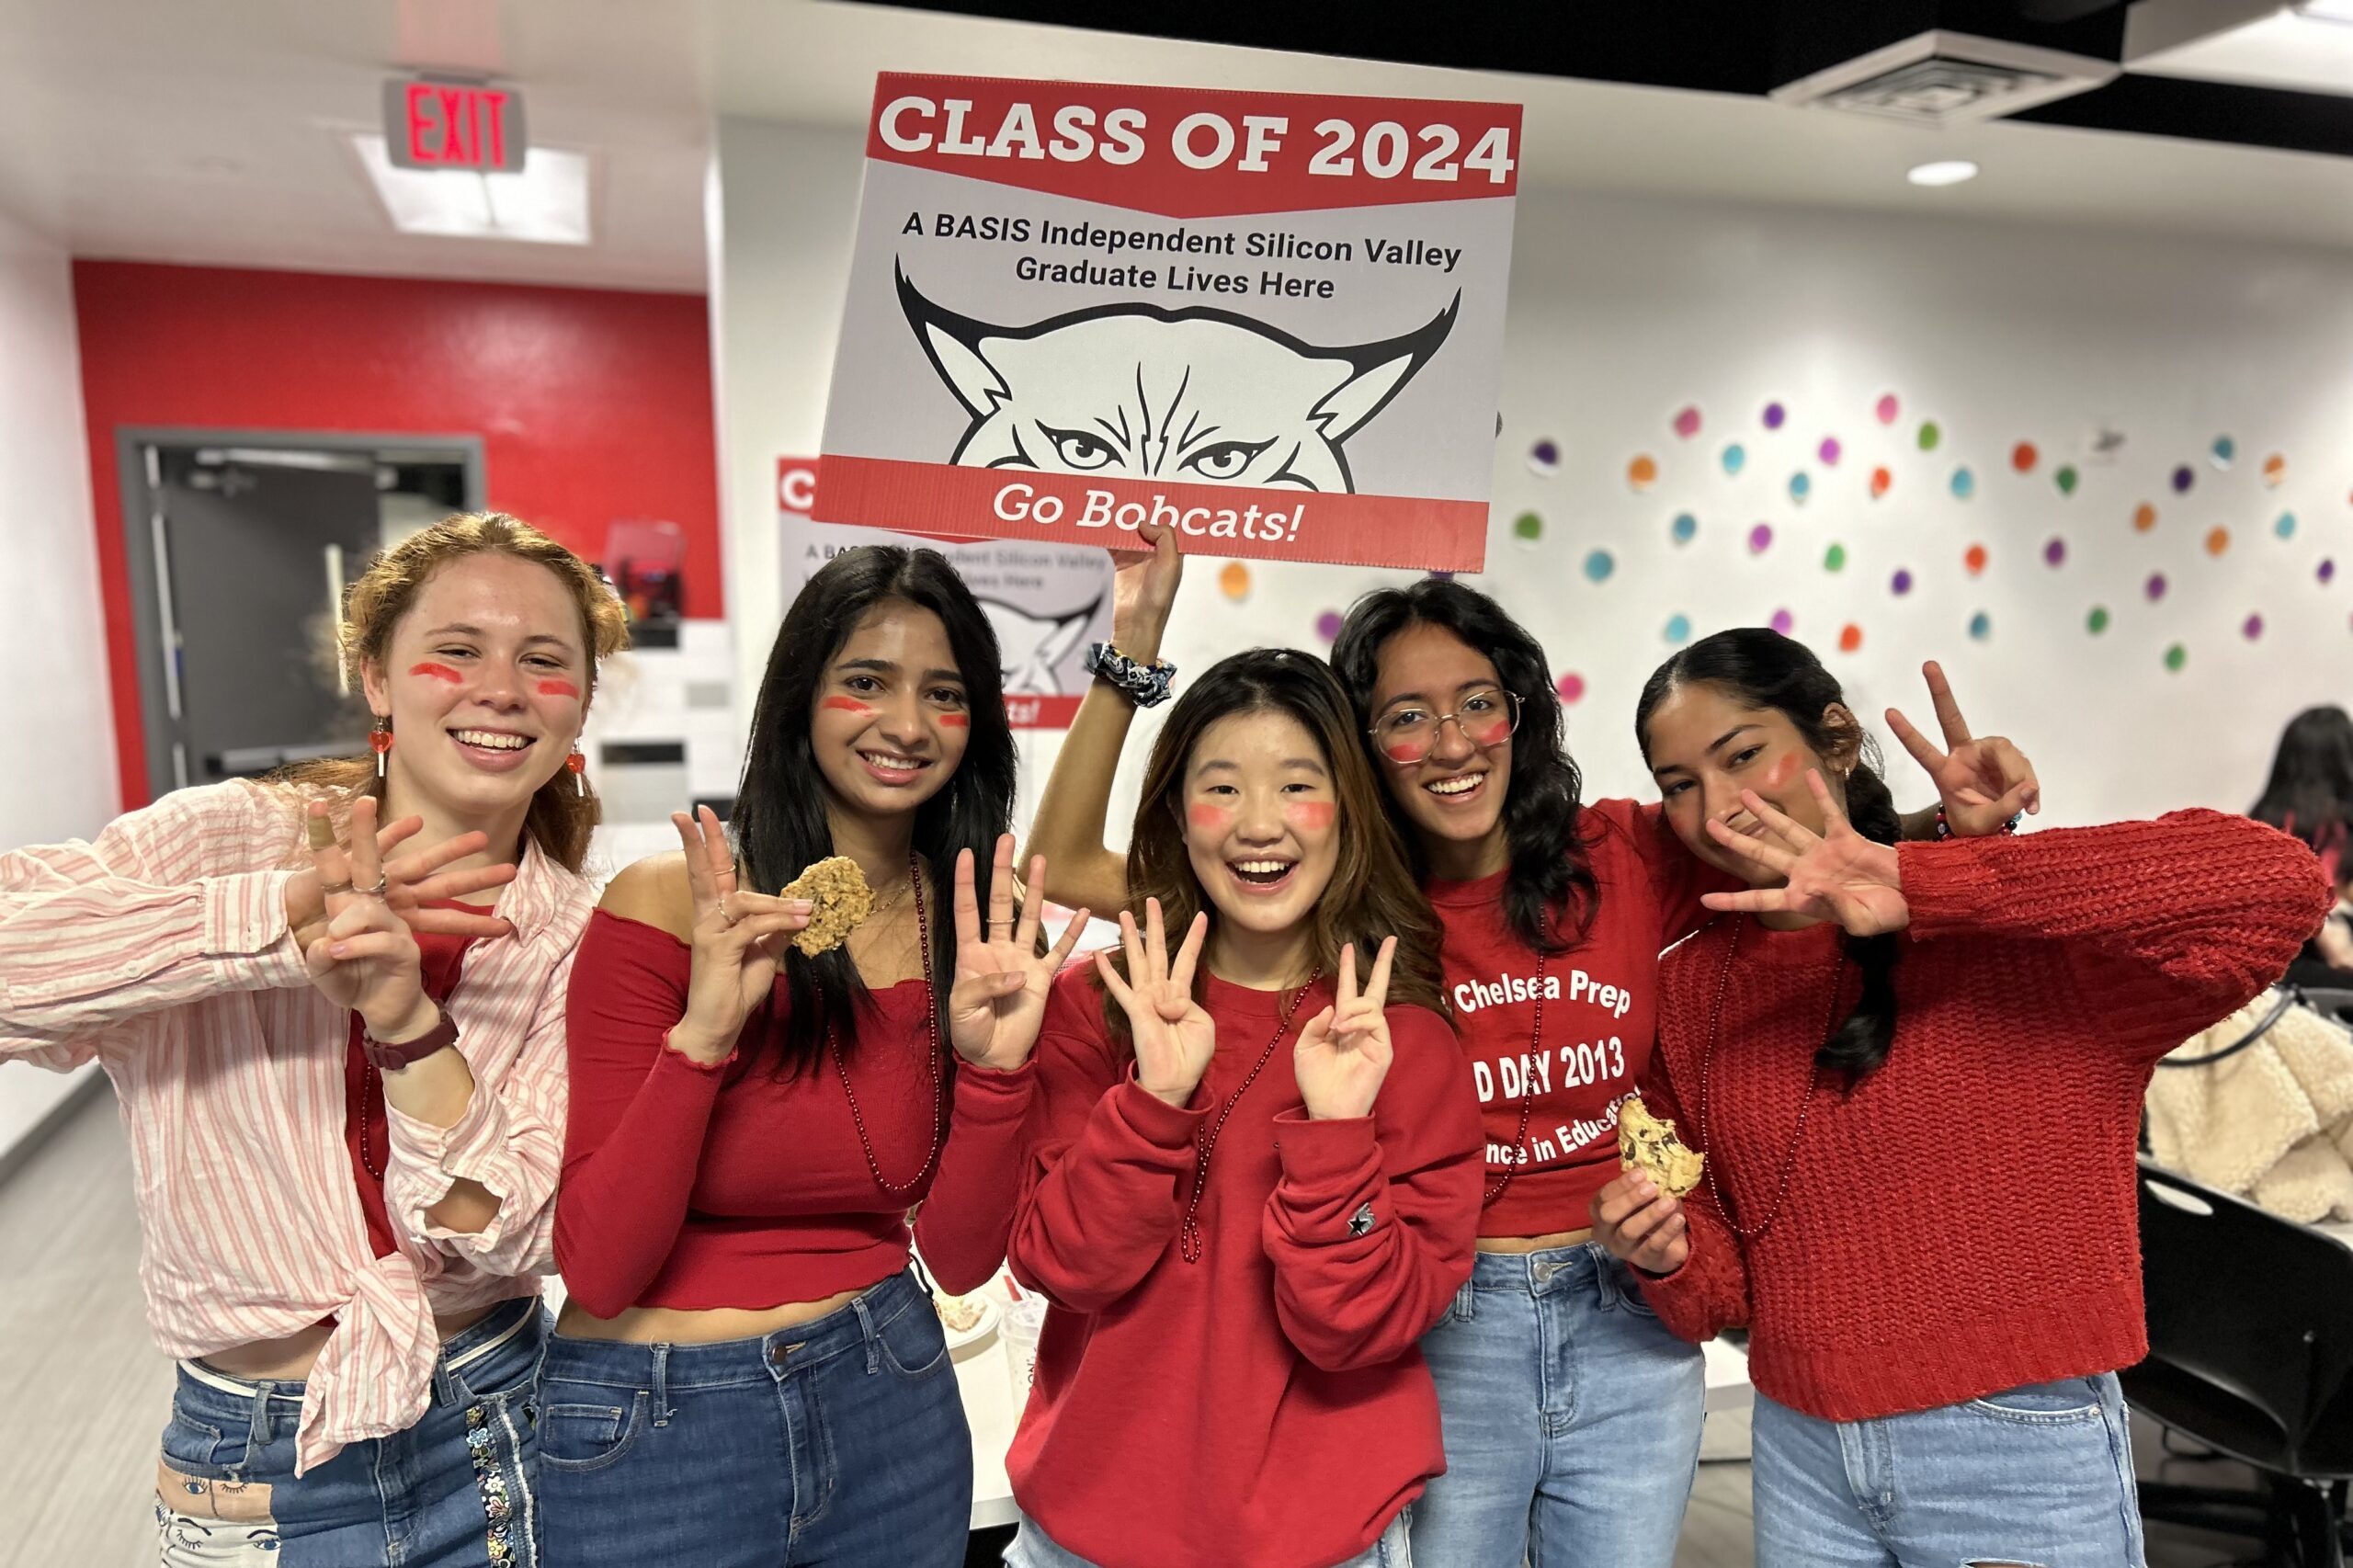 Featured Image for BASIS Independent Silicon Valley’s Class of 2024 College Acceptances